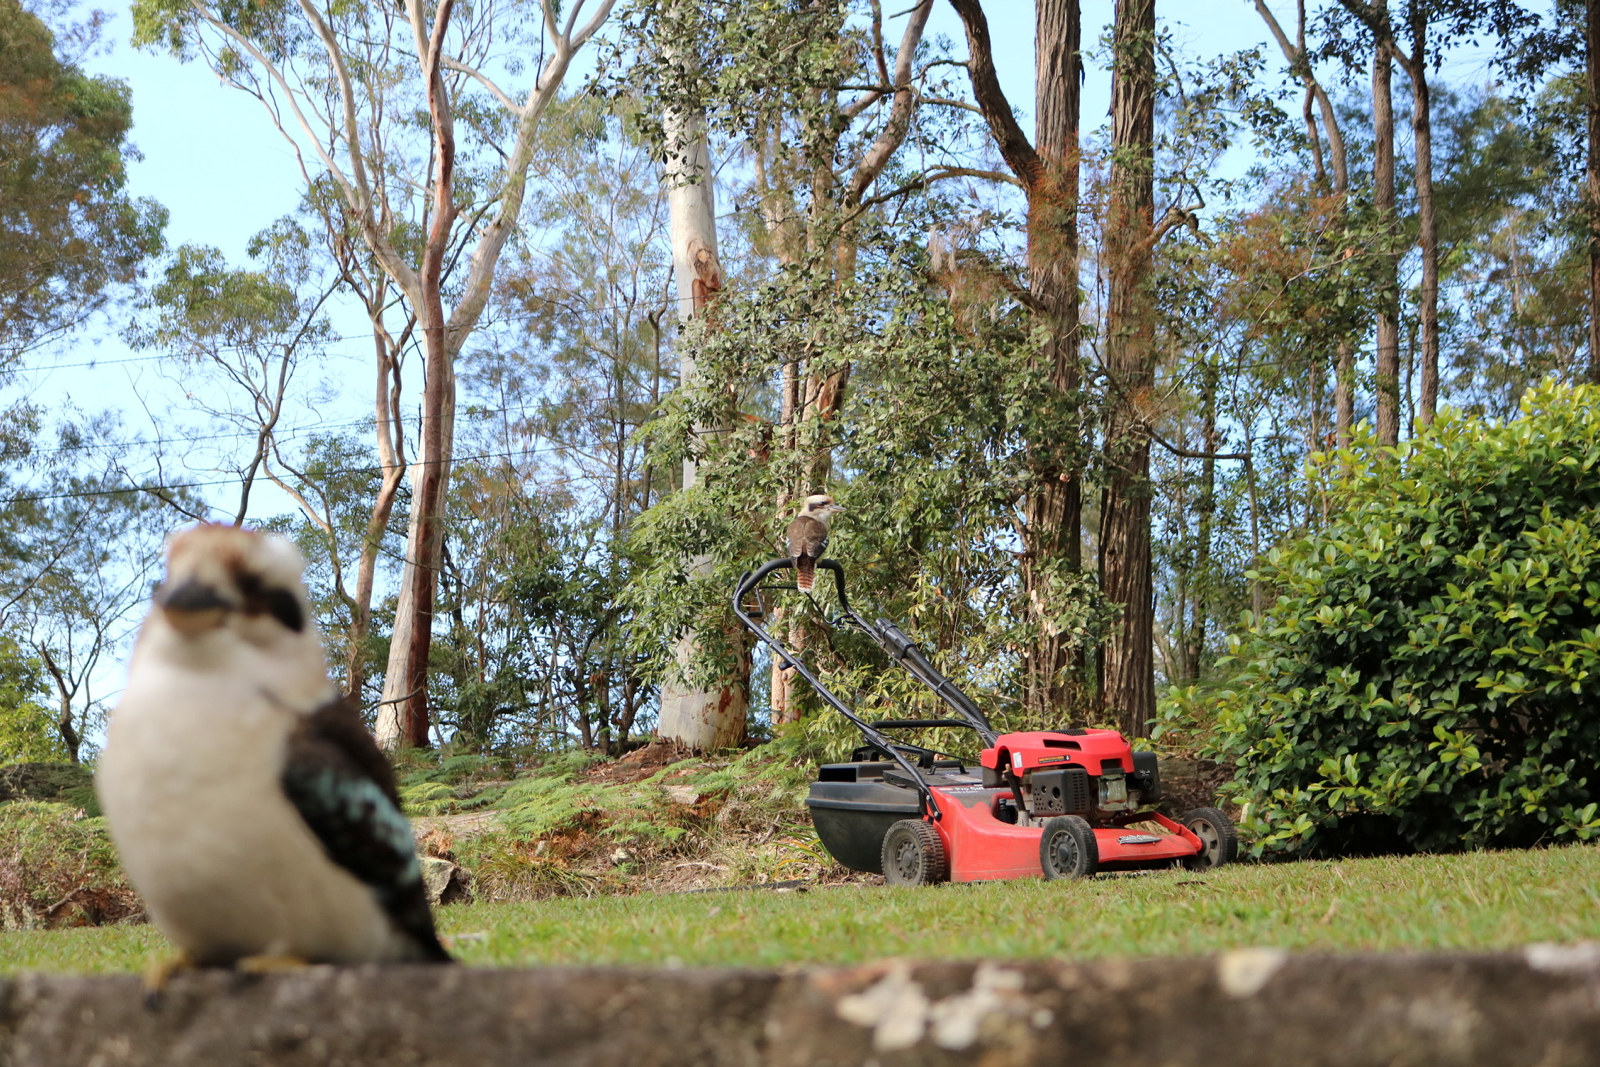 One kookaburra watches from atop the mower thwe other on the wall at rose seidler house